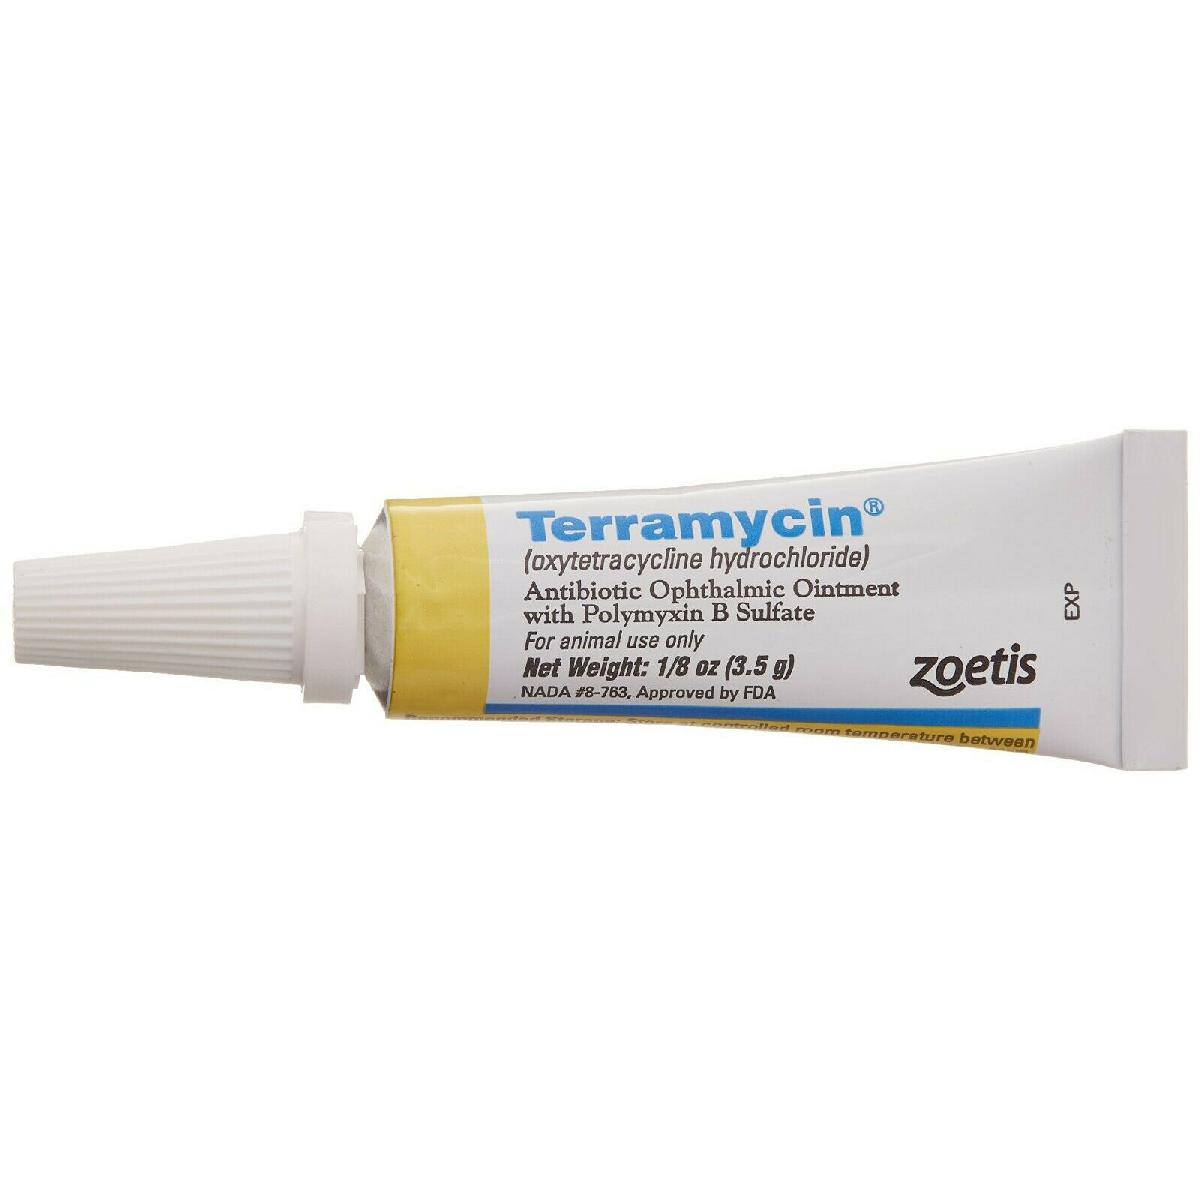 Terramycin Ophthalmic Ointment with Polymyxin B Sulfate for Dogs and